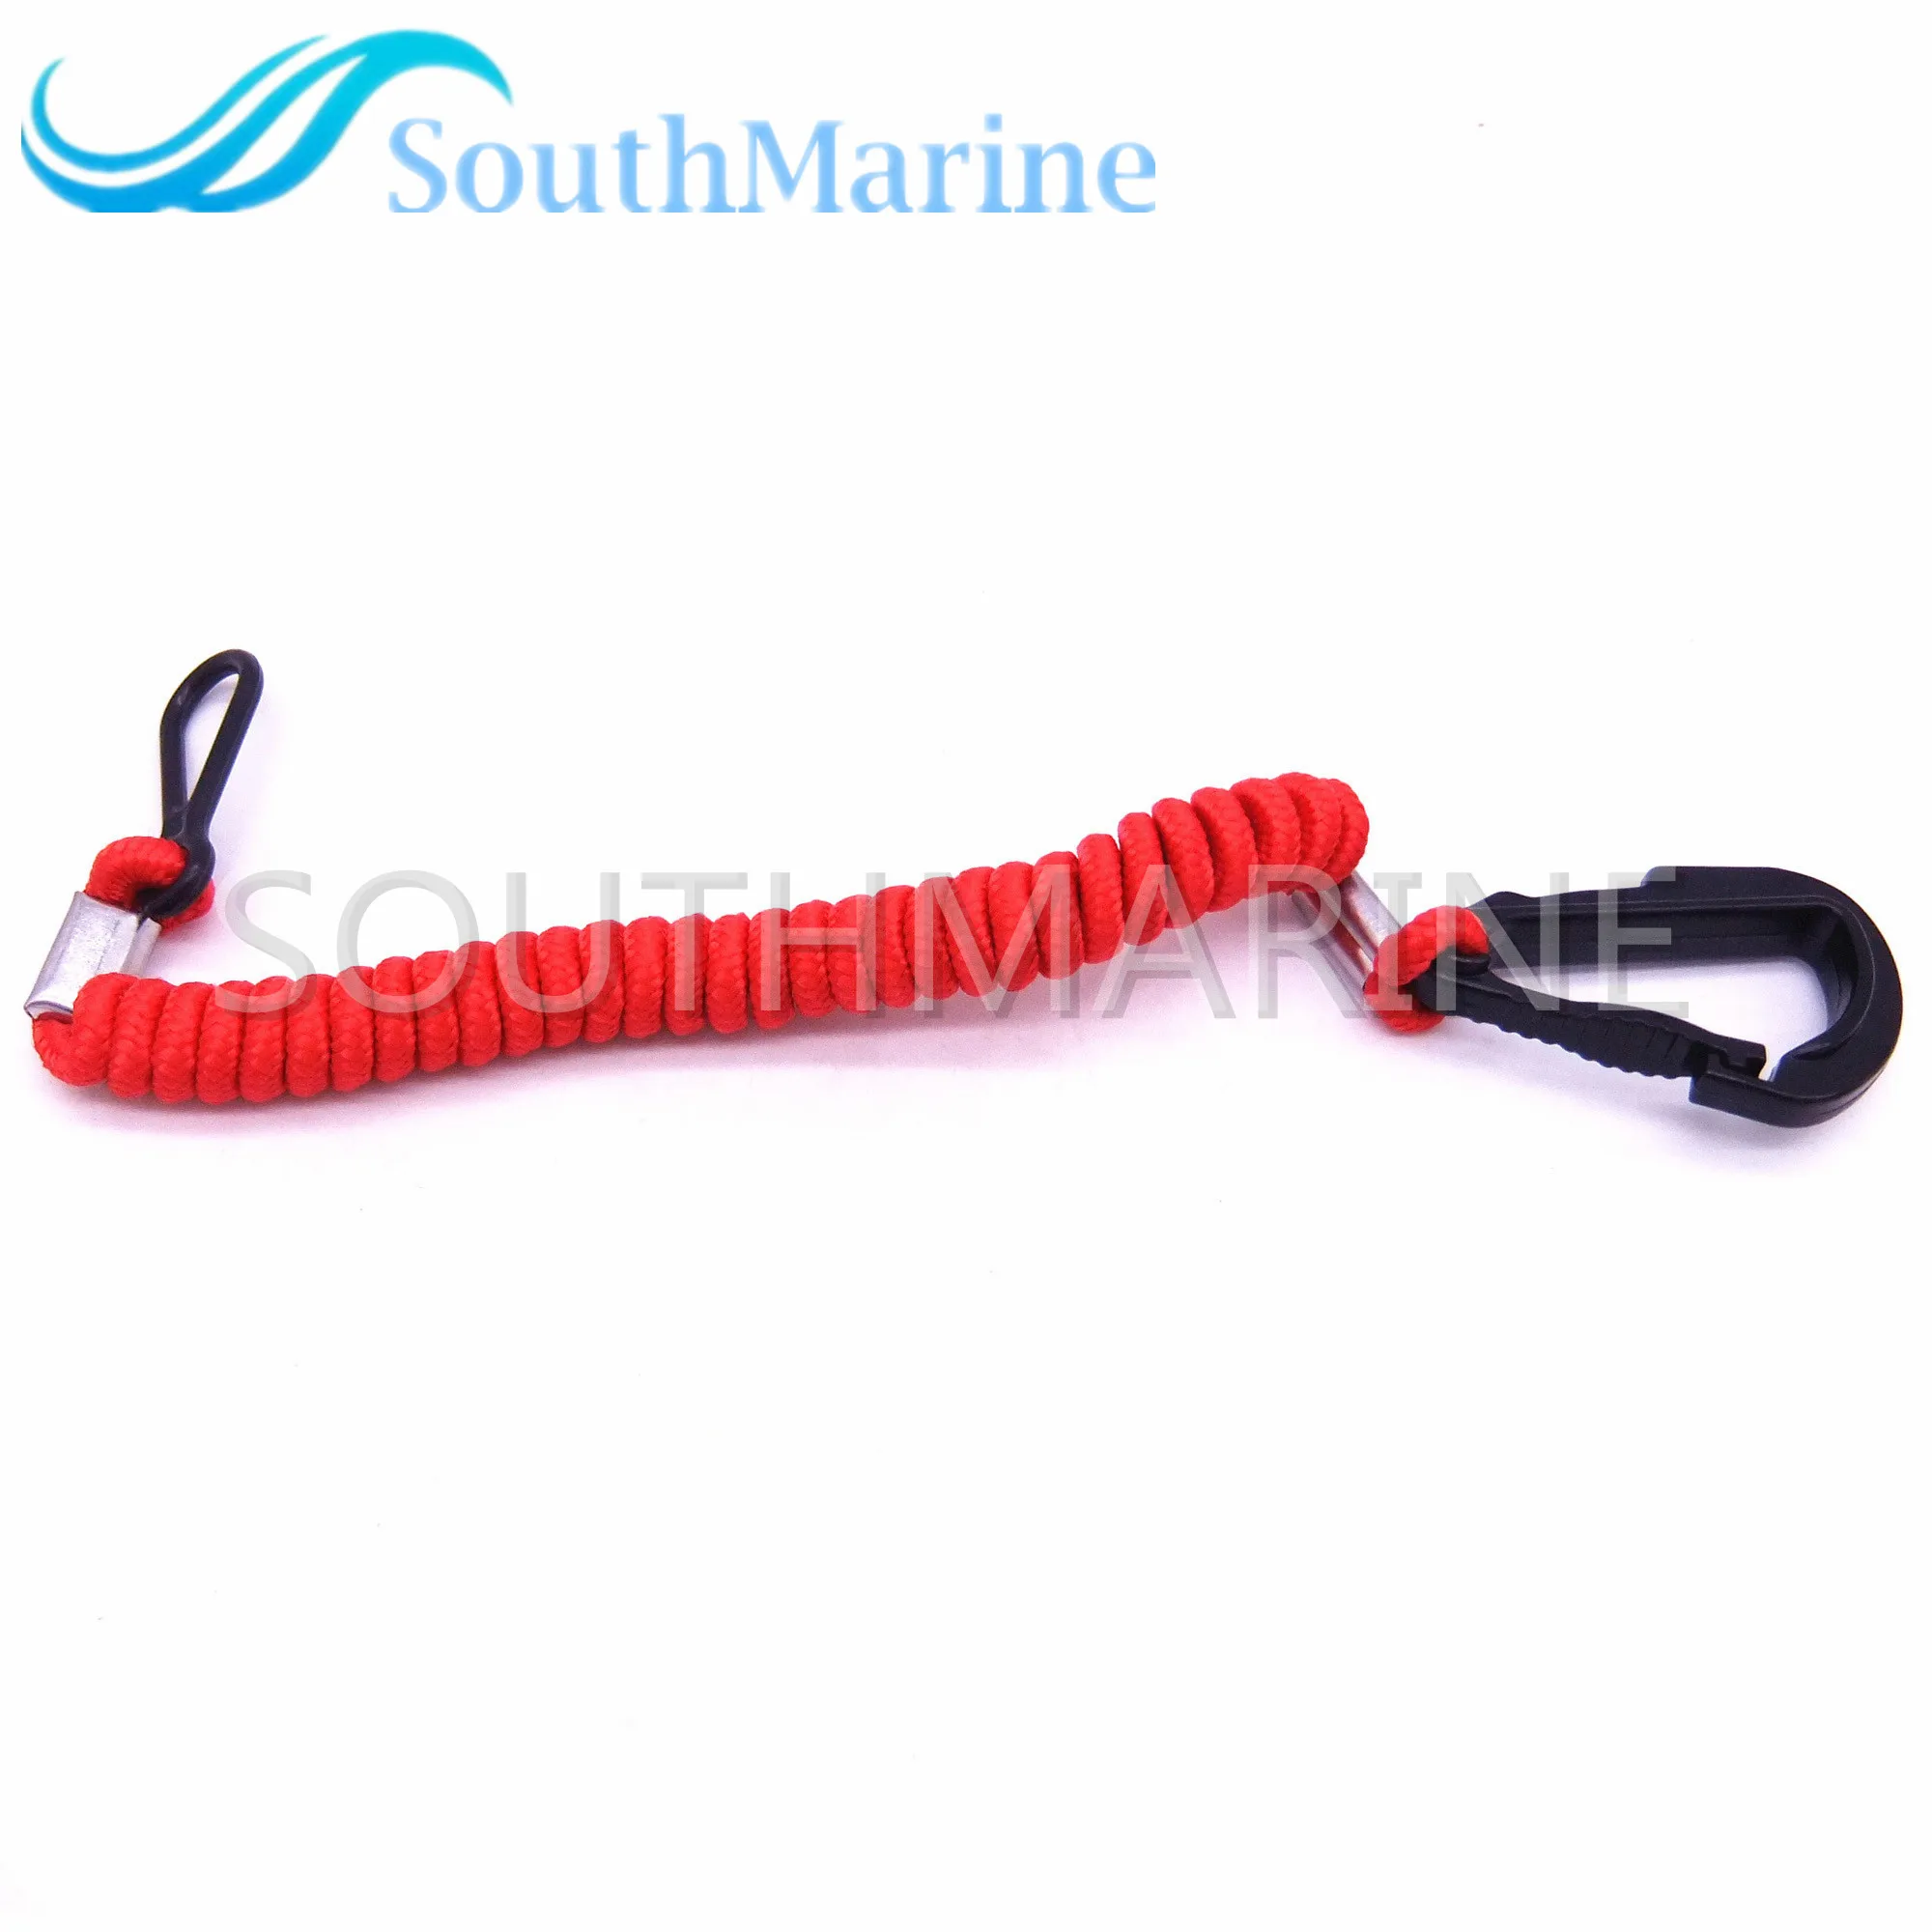 8M0092849 15920T54 15920A54 15920Q54 Emergency Stop Switch Safety Lanyard Cord for Mercury Mercruiser Boat Engine 